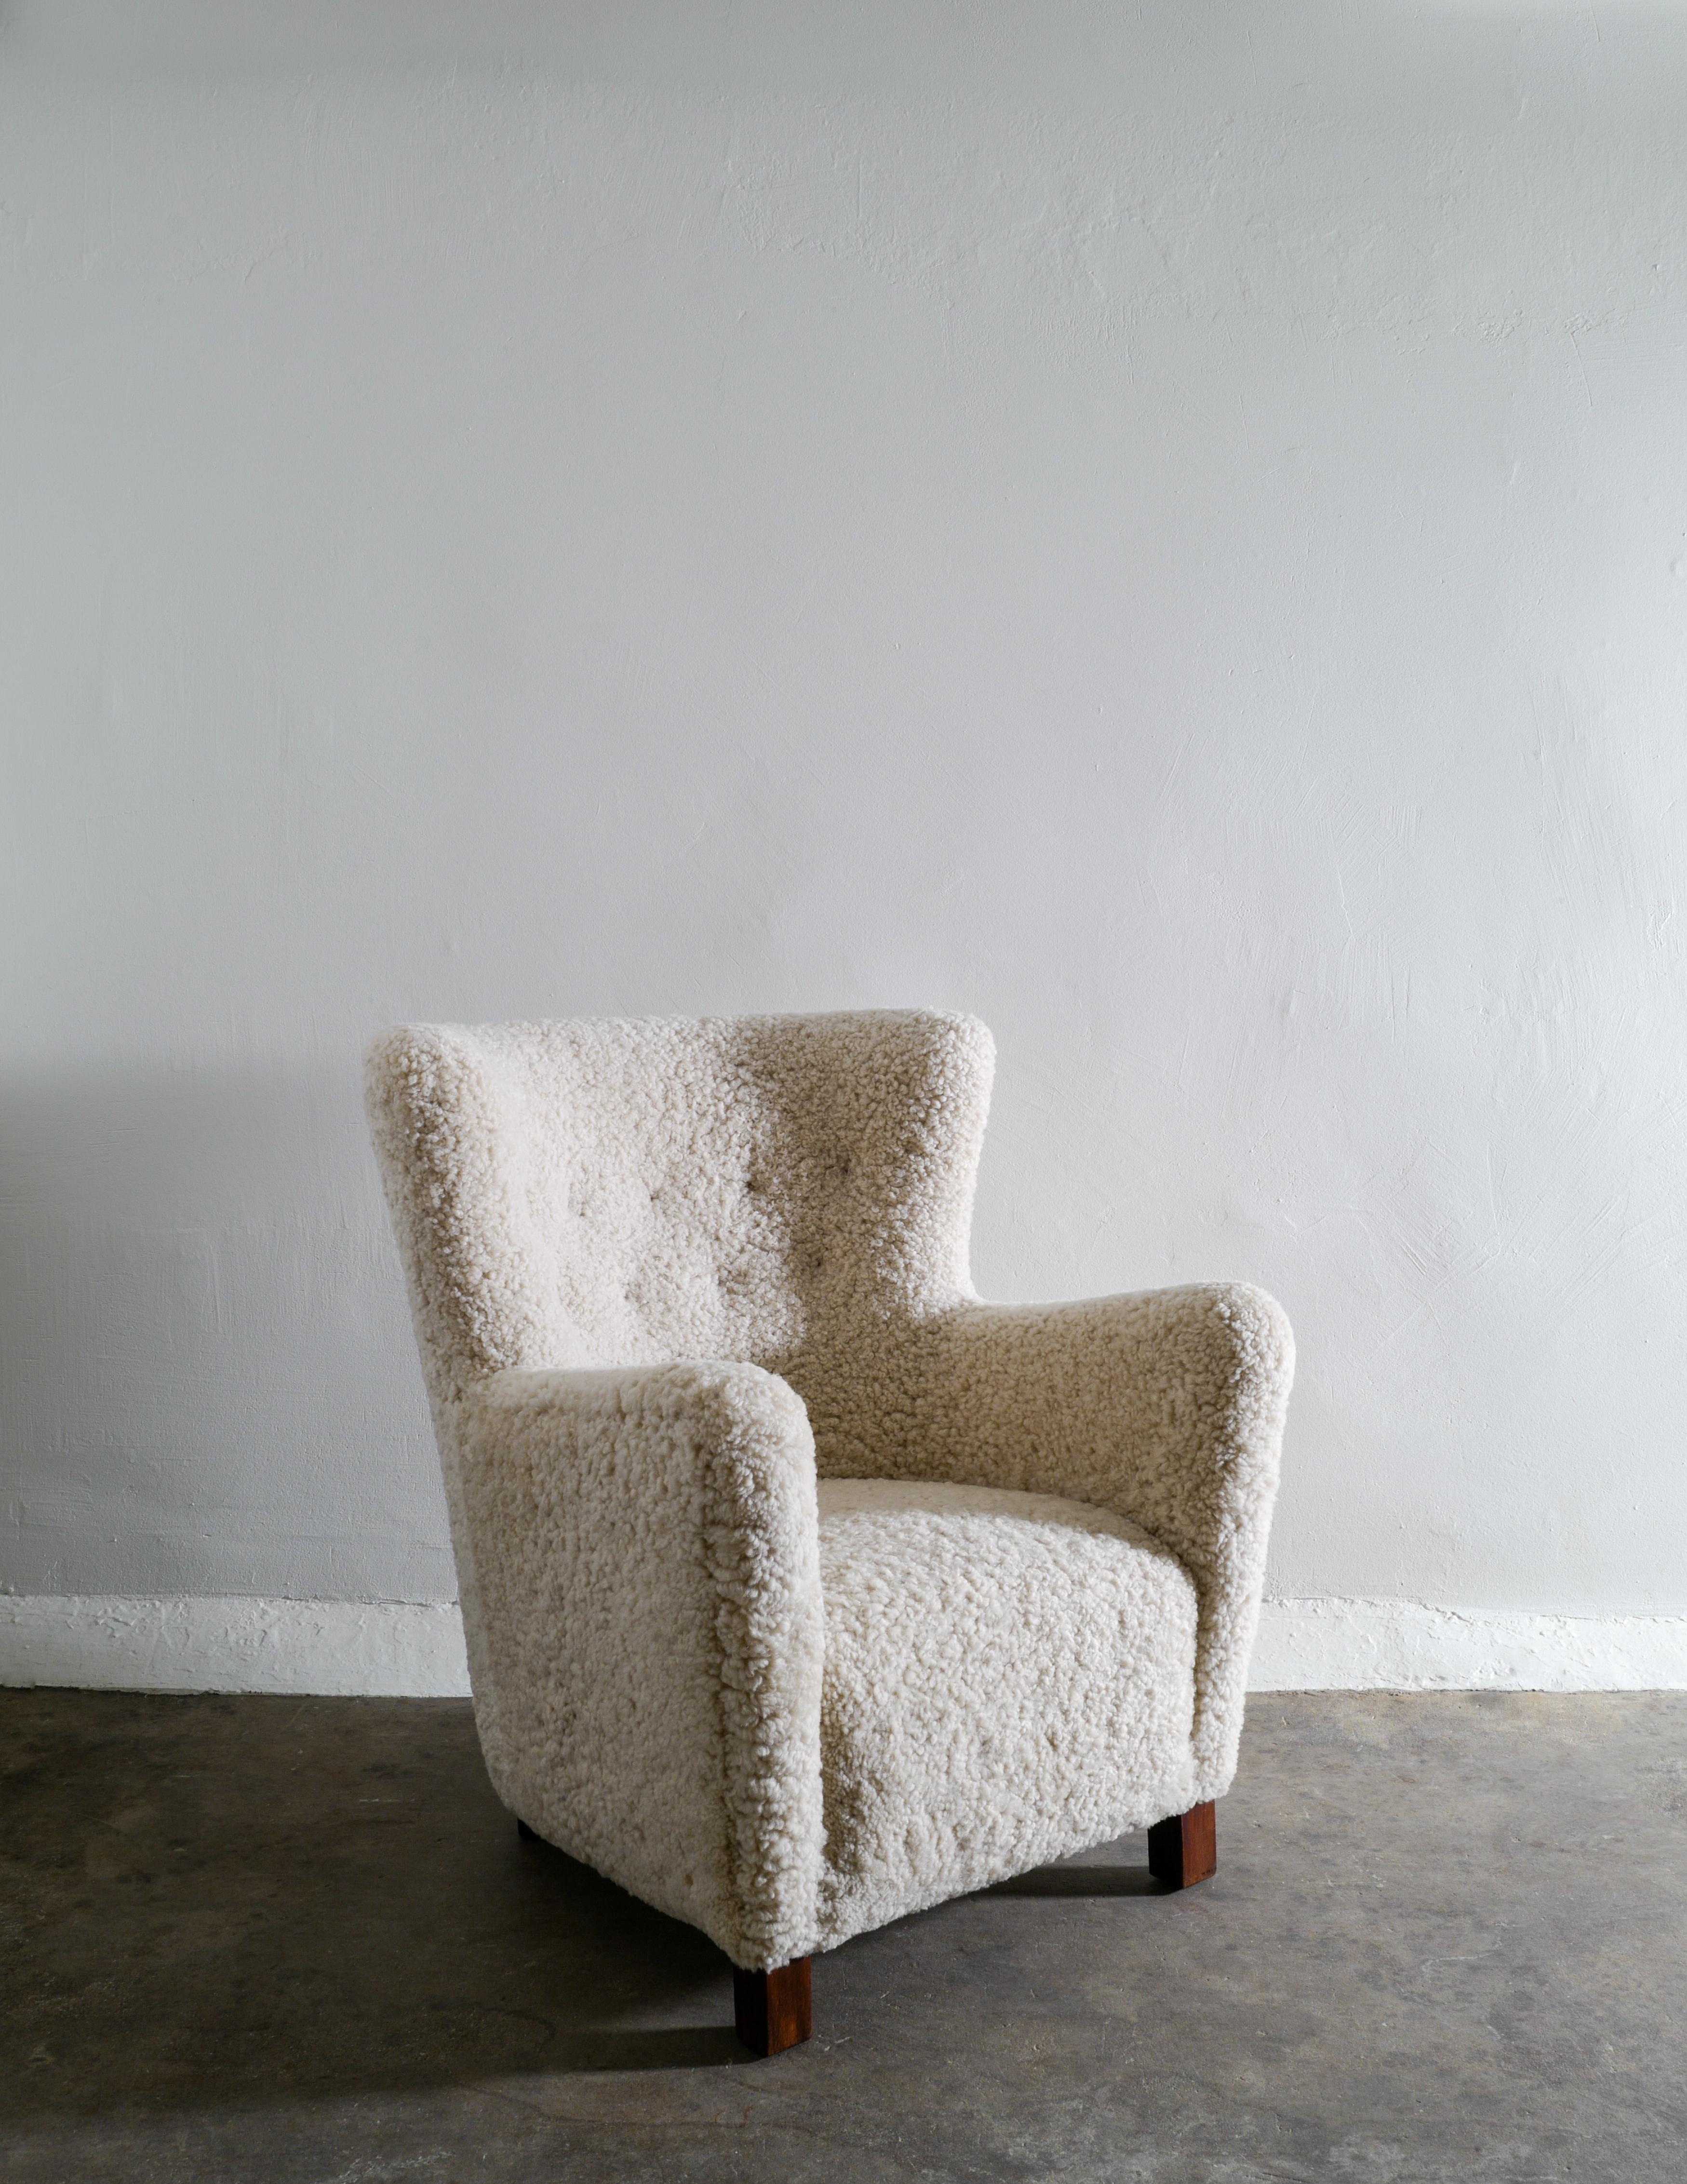 Rare 1940s danish armchair in sheepskin with oak feet in style of Fritz Hansen. Produced in Denmark and newly restored and upholstered in a neutral sheepskin. Excellent condition.